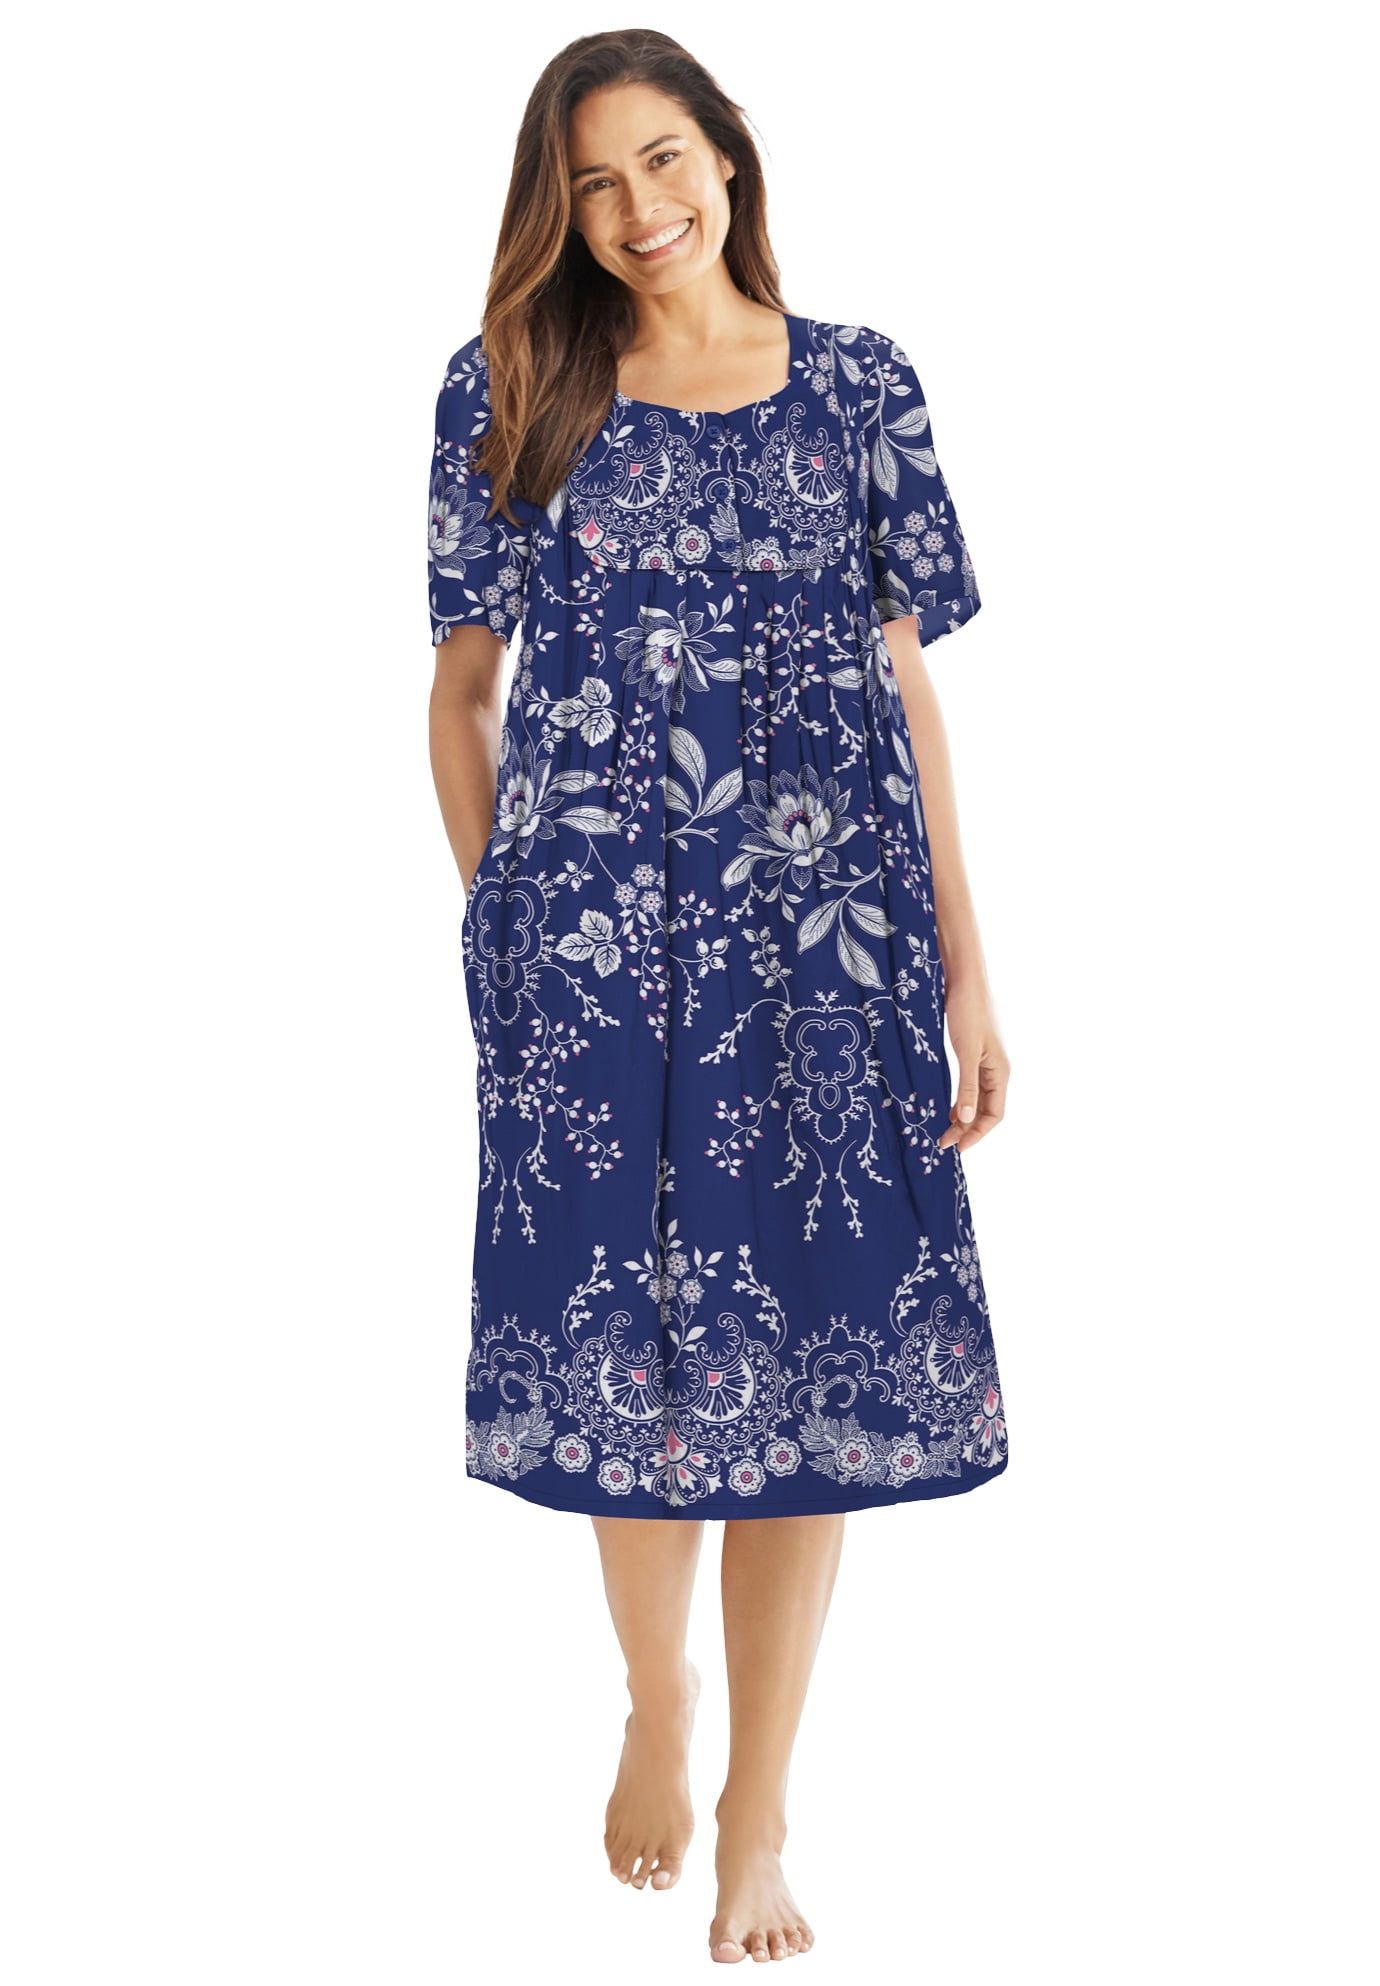 Only Necessities Women's Plus Size Mixed Print Short Dress or Nightgown ...